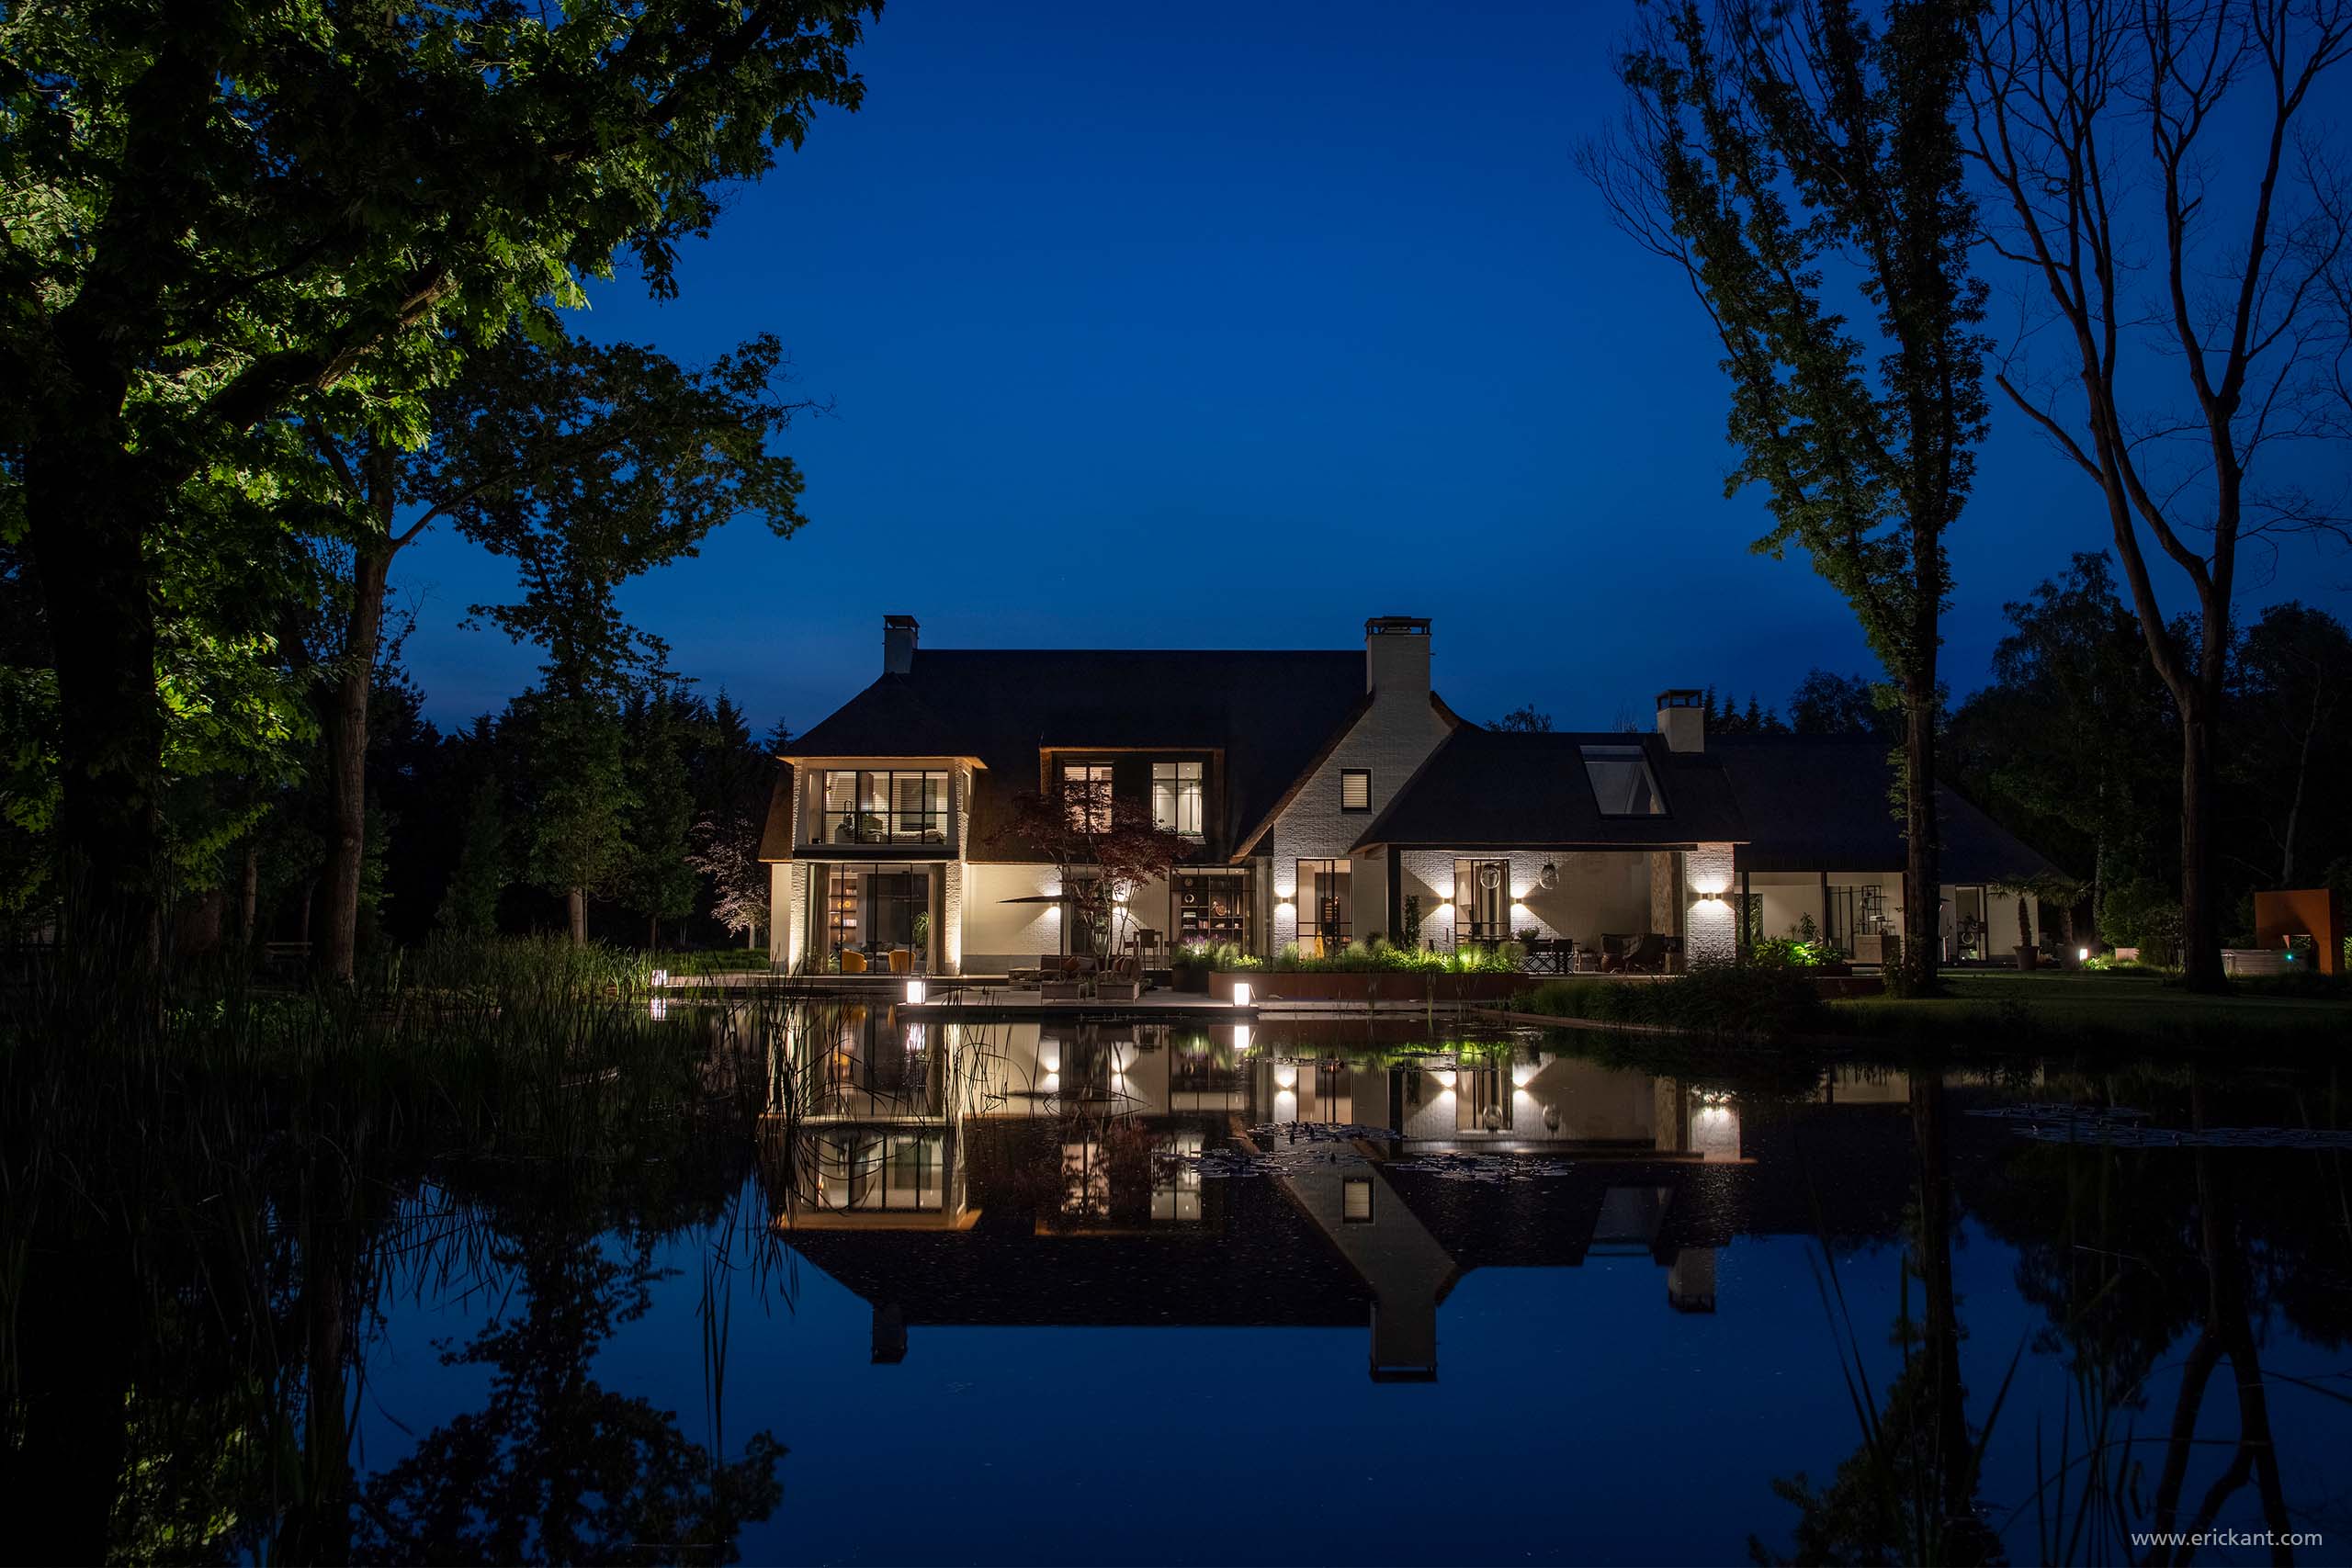 Modern Country House-exterior waterview by night-ERIC KANT.jpg